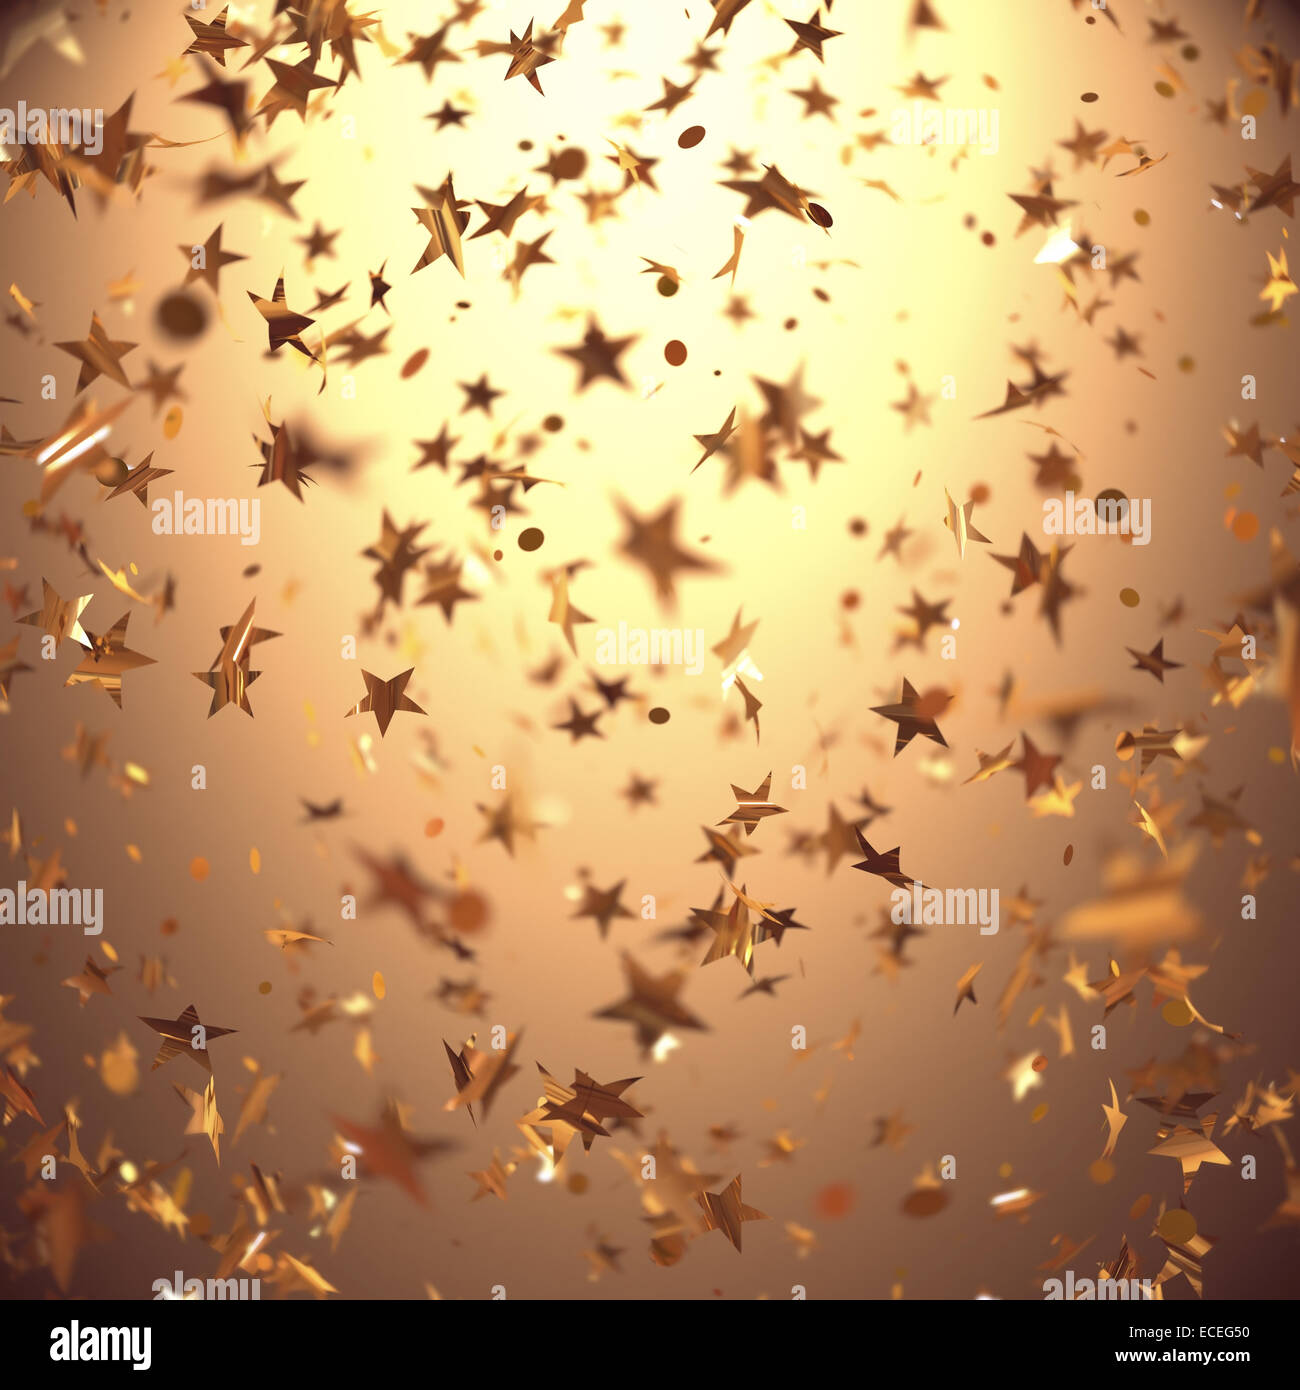 Background with stars in depth of field. Celebration concept. Stock Photo